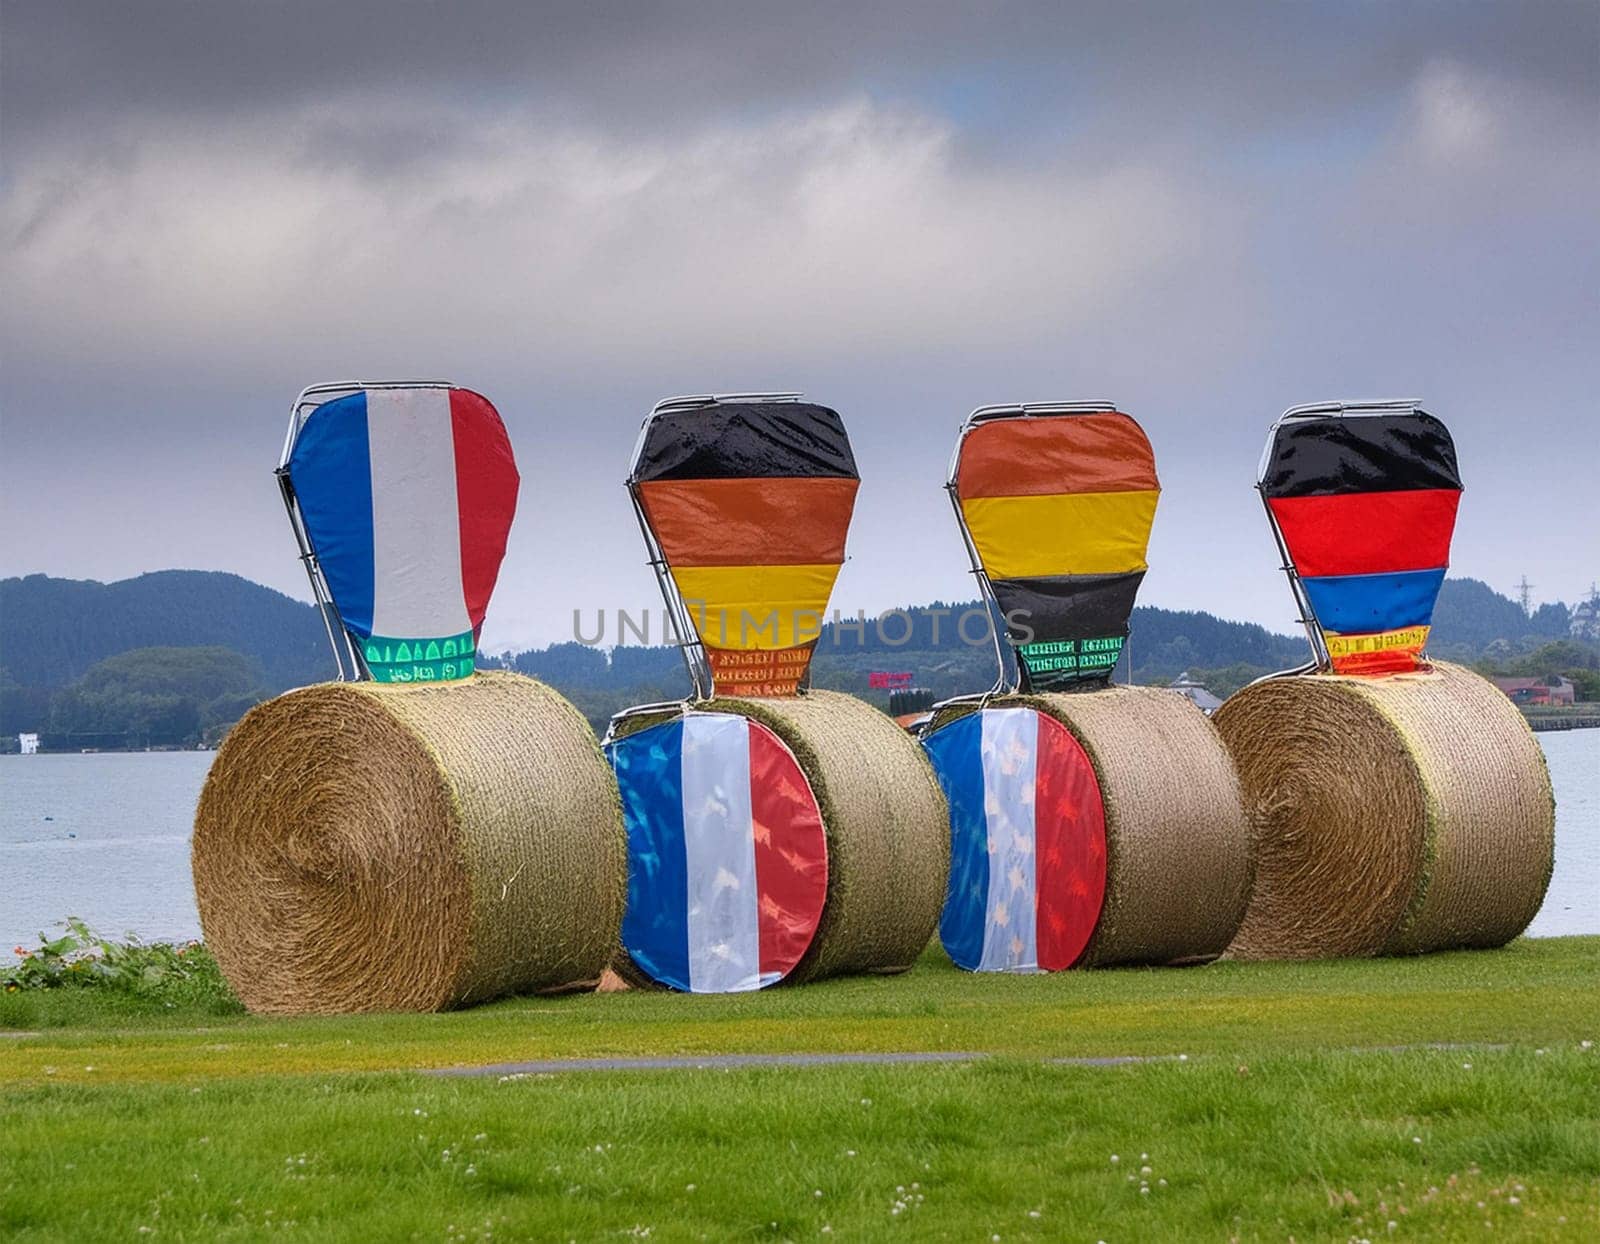 Funny figures made of straw bales with flags of different countries by JFsPic